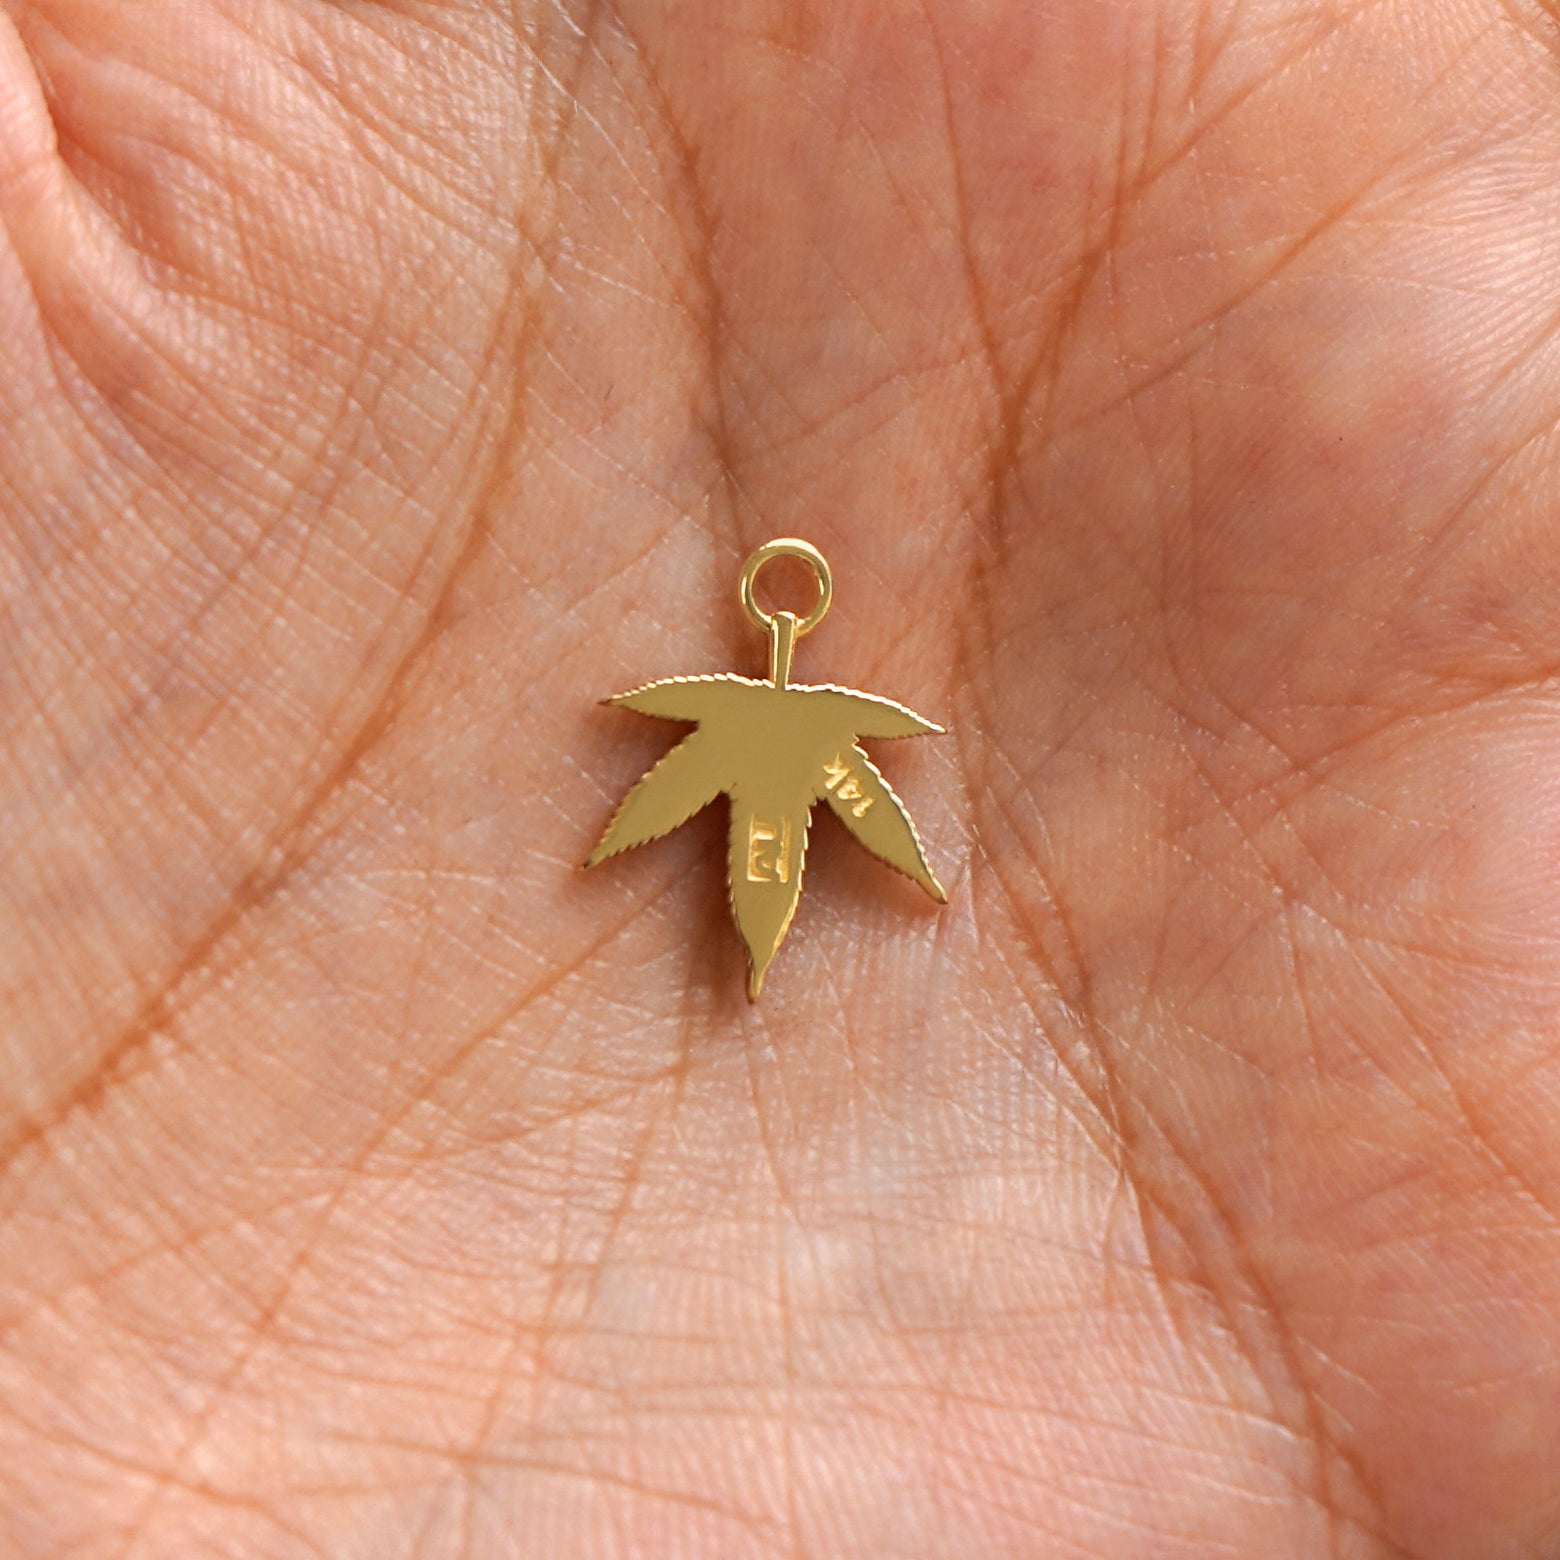 A 14k gold Cannabis Charm for earring resting in a model's palm to show the back of the charm